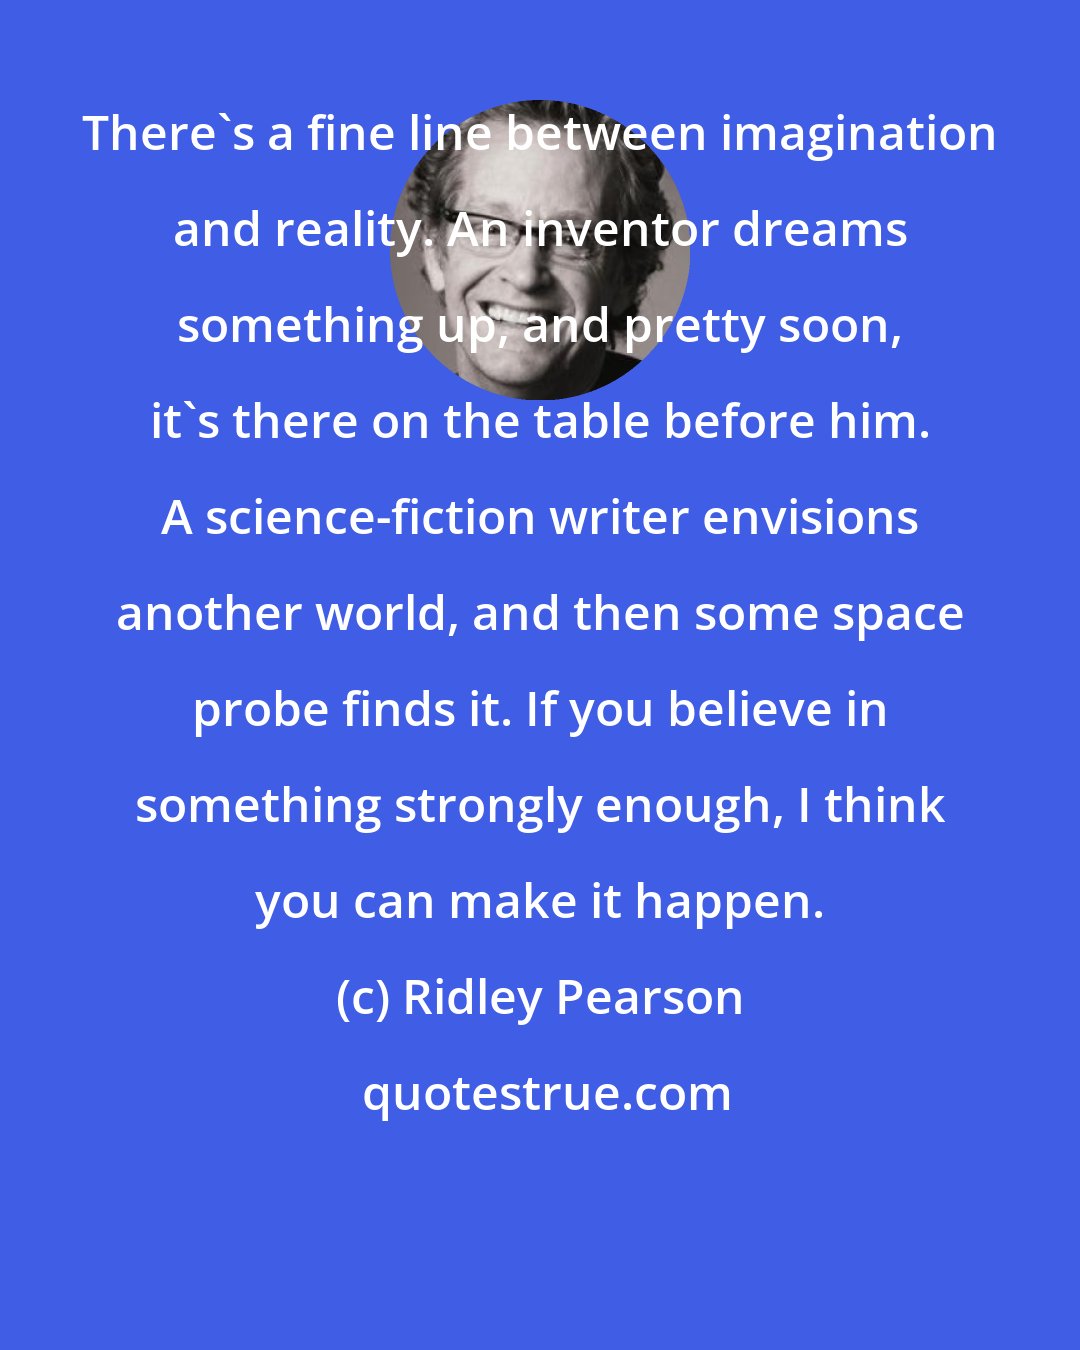 Ridley Pearson: There's a fine line between imagination and reality. An inventor dreams something up, and pretty soon, it's there on the table before him. A science-fiction writer envisions another world, and then some space probe finds it. If you believe in something strongly enough, I think you can make it happen.